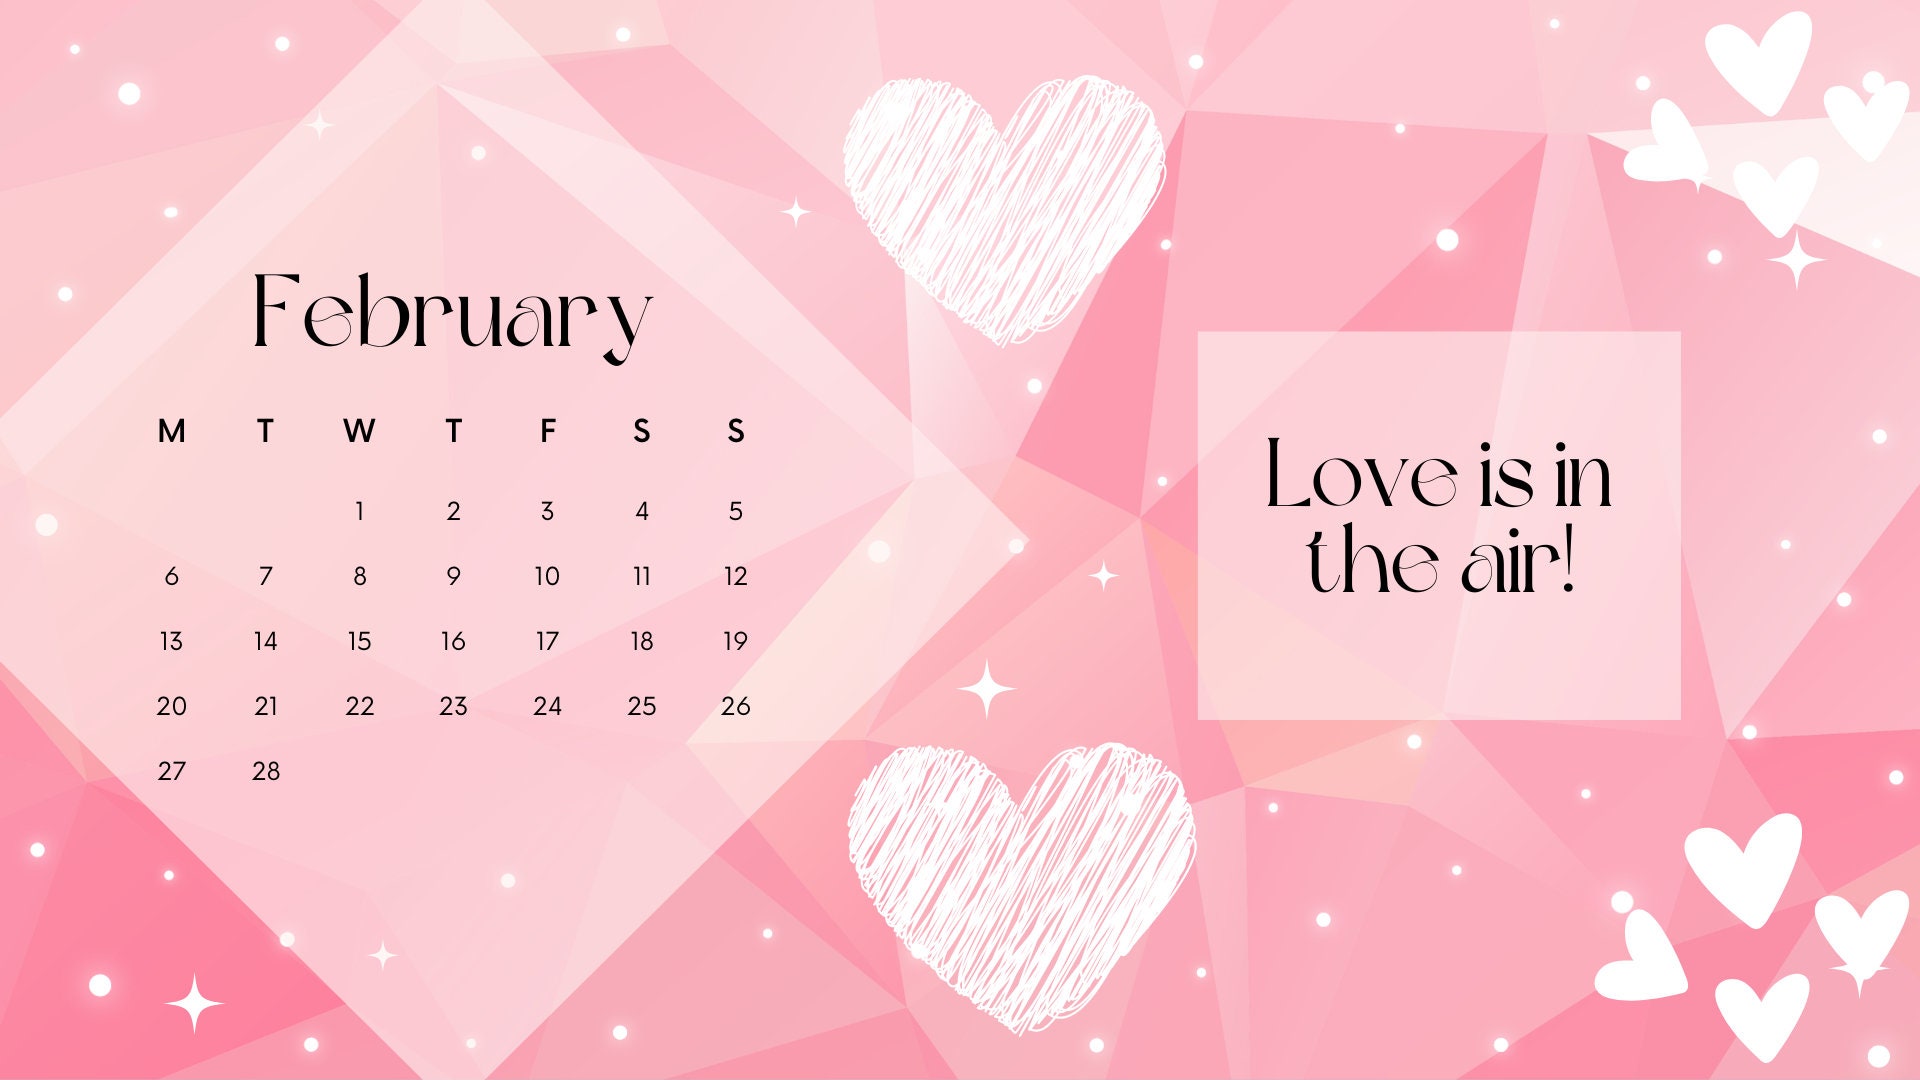 February 2022 wallpapers  50 FREE calendars for your desktop  phone